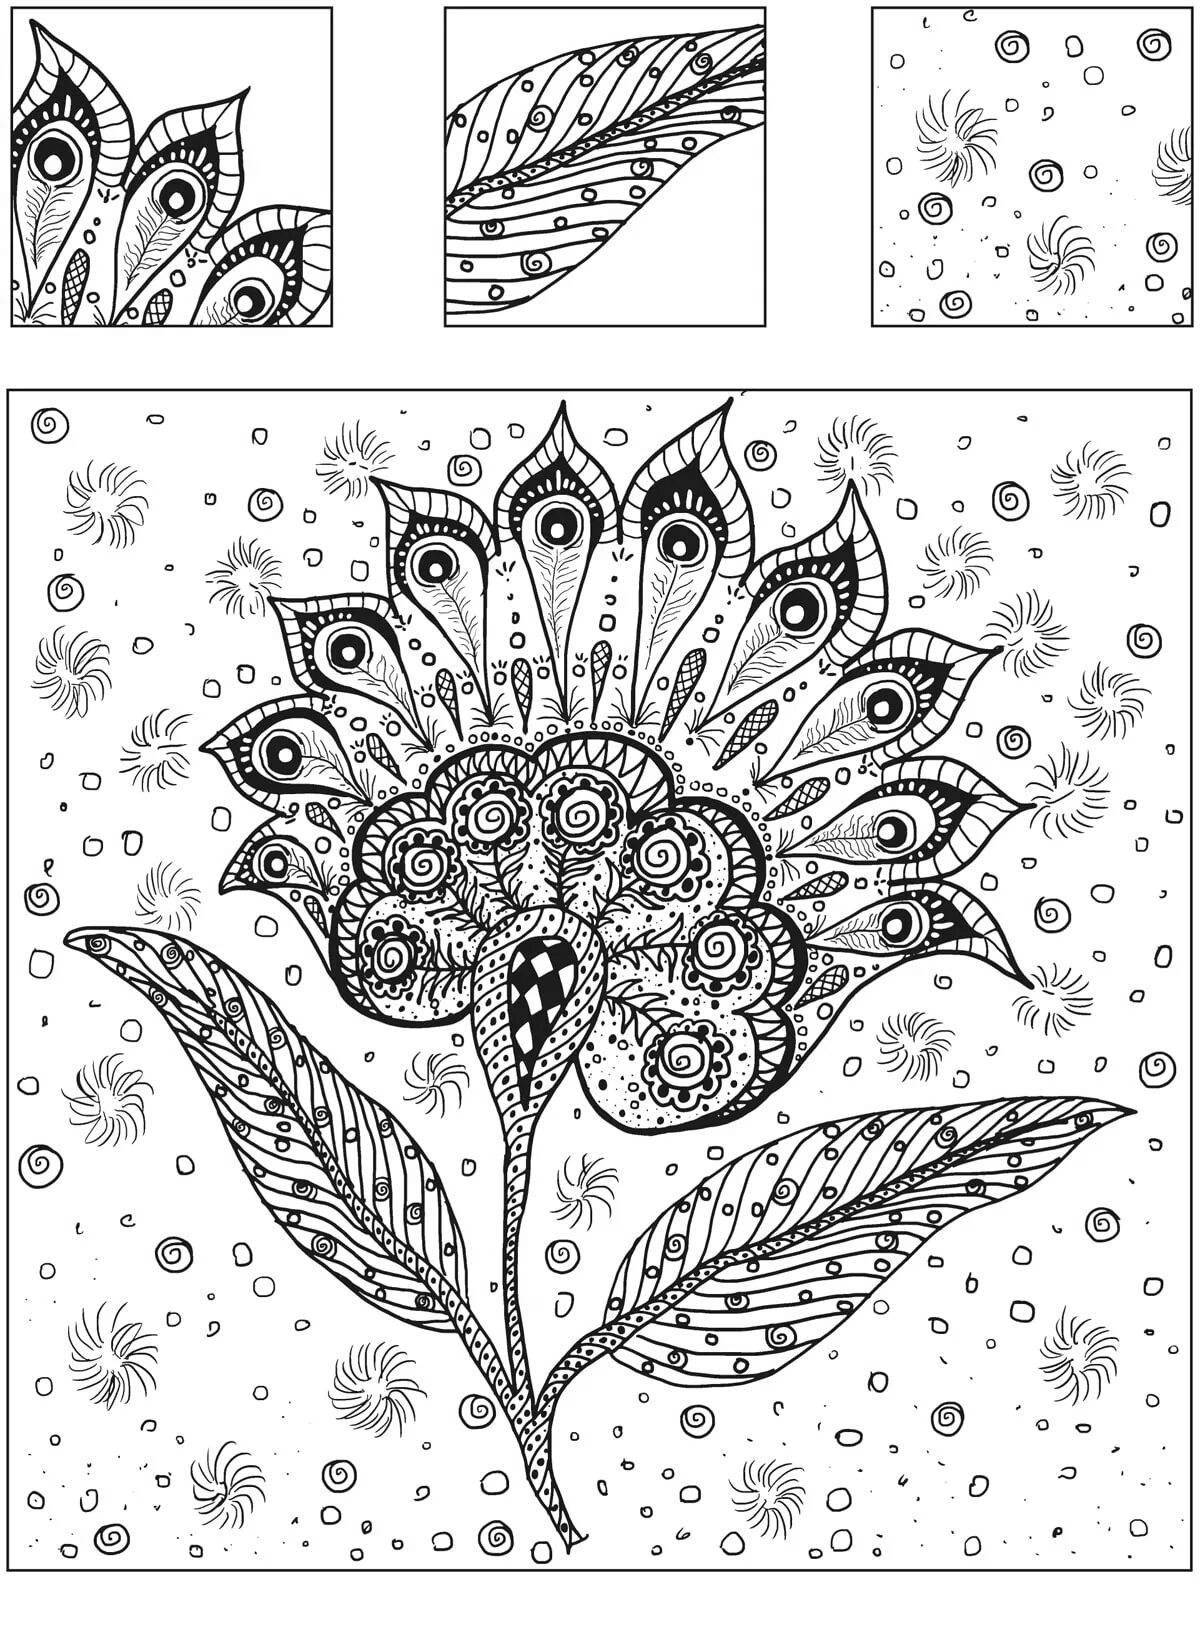 Colorful coloring pages magic patterns